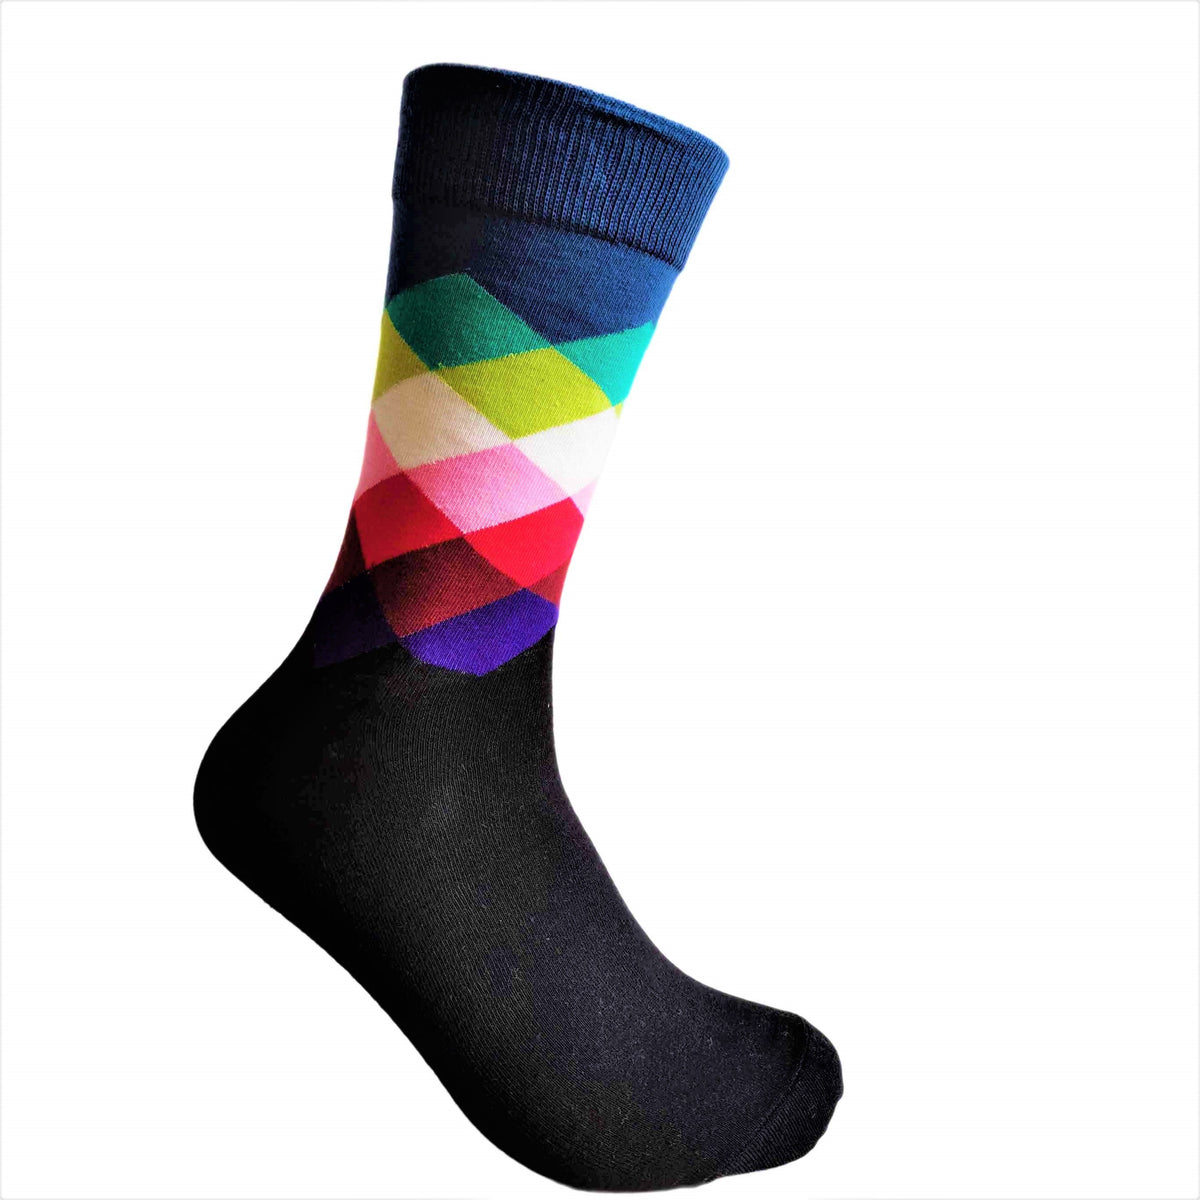 3-Pack Navy, Green and Pink Socks - British D'sire